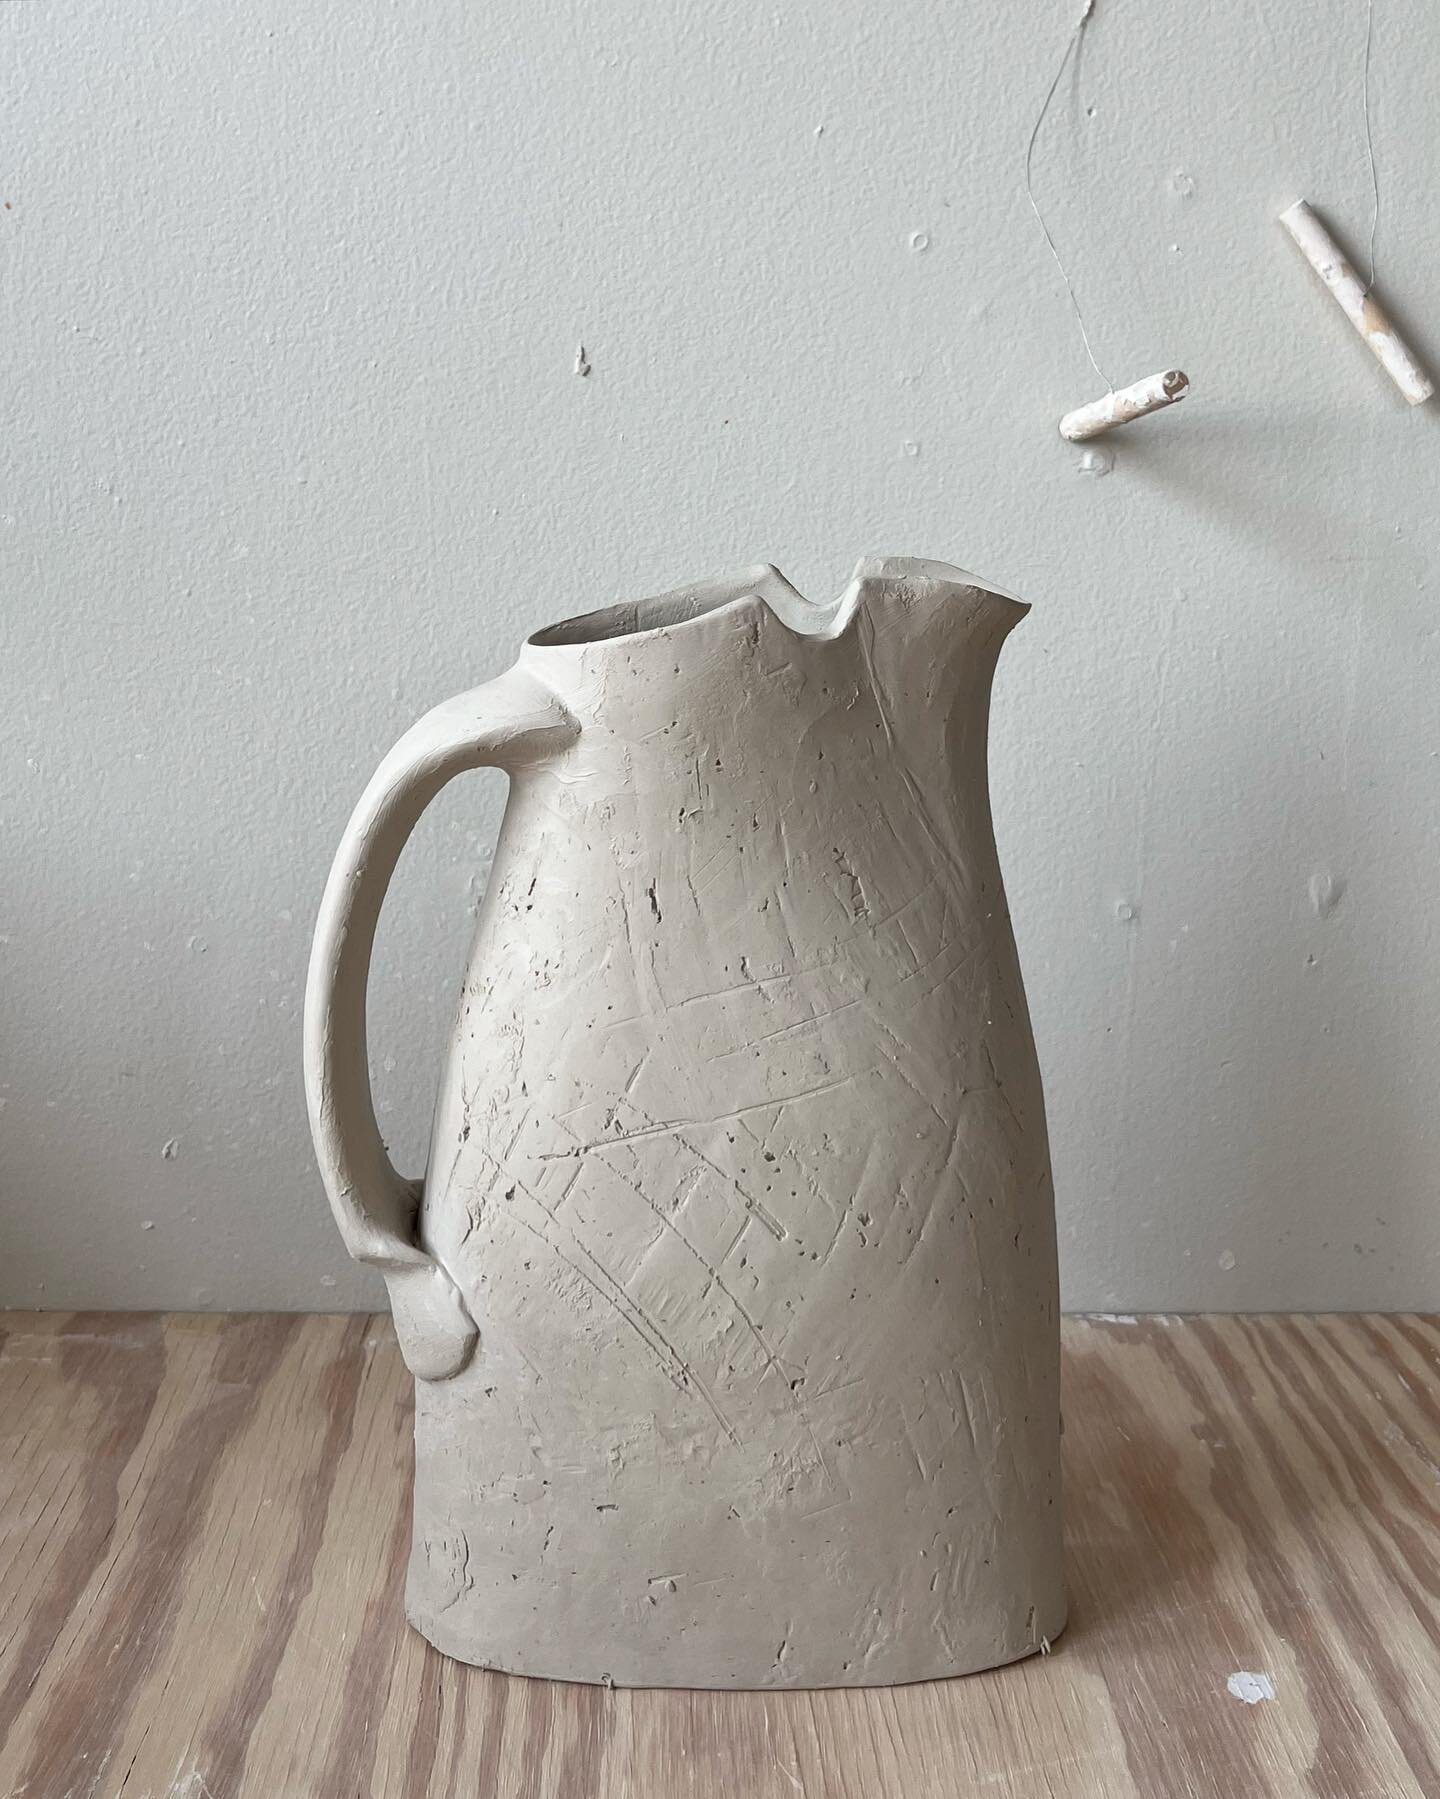 Pitchers in progress. 
Looking forward to participating in Summer is Served: Pitchers at Charlie Cummings Gallery opening August 1st!
@charliecummingsgallery 
#pottery